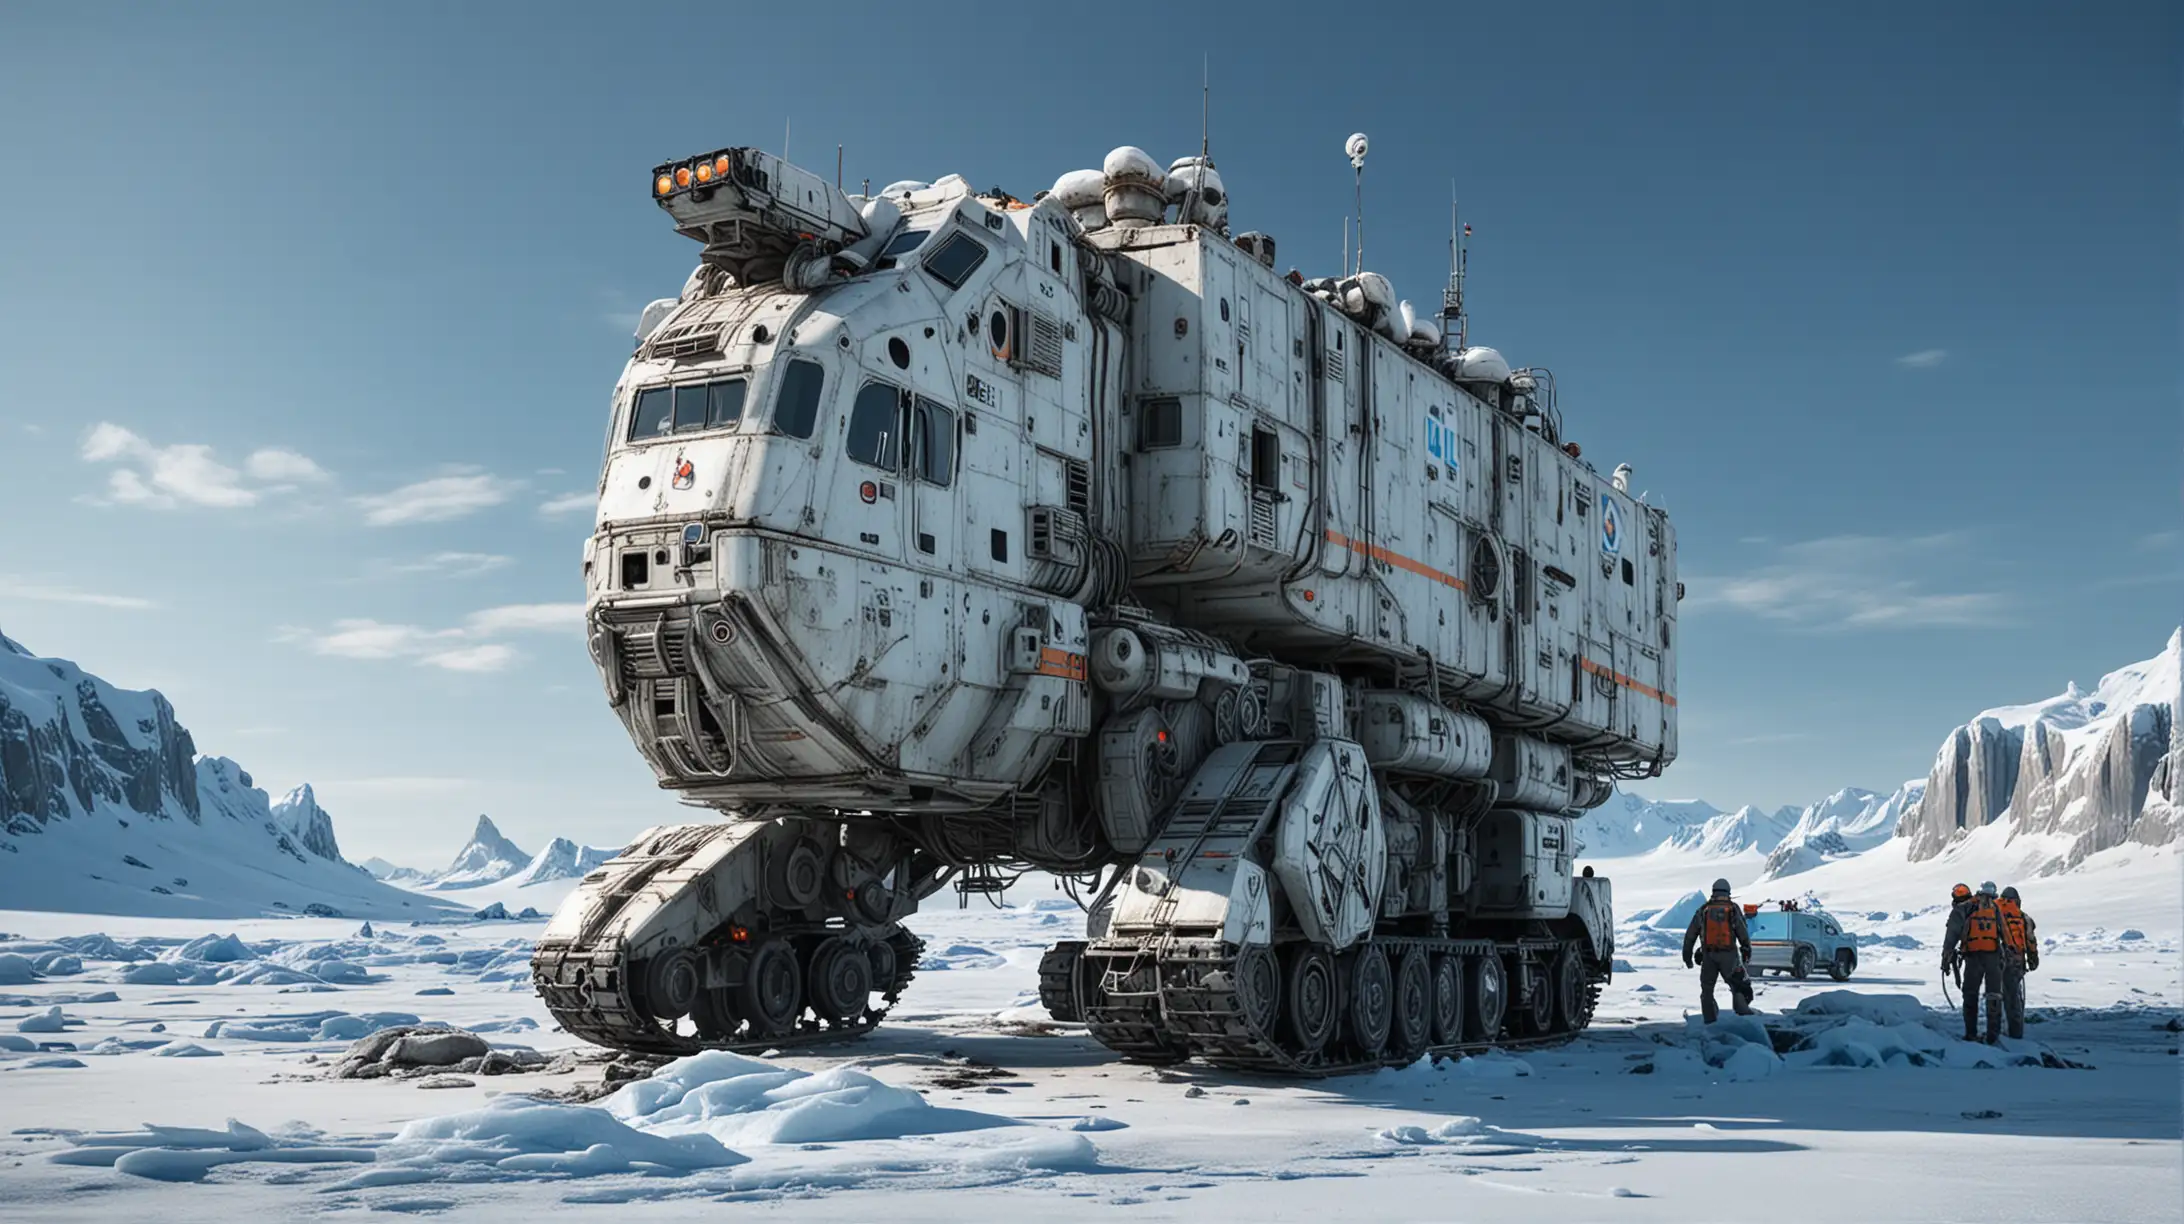 Space Age Mobile Outpost on Frozen Planet IceBreaker Crawler